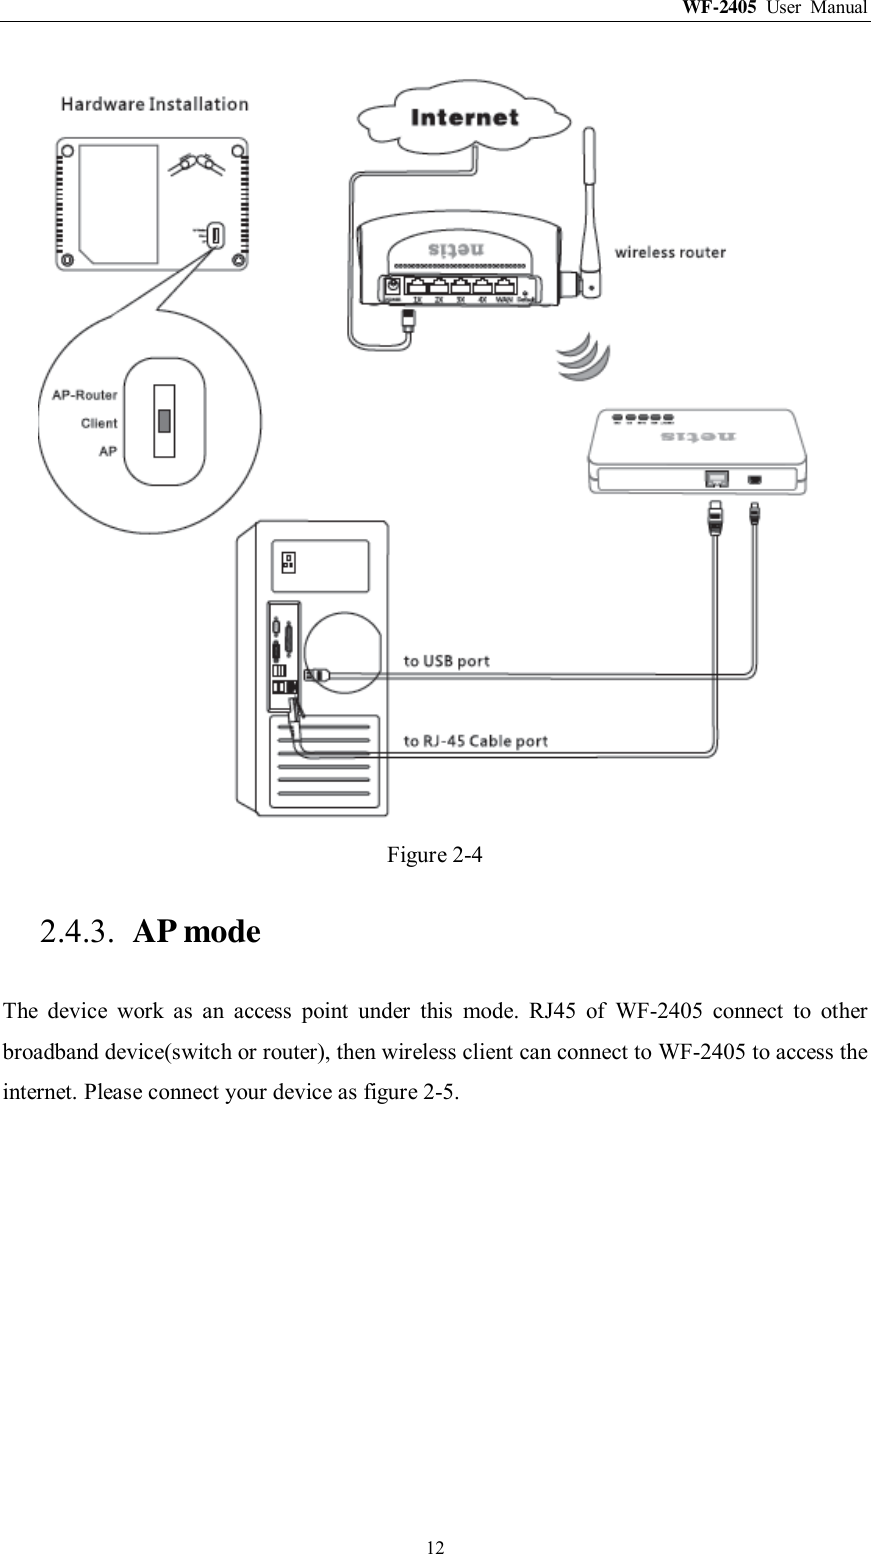 WF-2405  User  Manual  12  Figure 2-4 2.4.3. AP mode The  device  work  as  an  access  point  under  this  mode.  RJ45  of  WF-2405  connect  to  other broadband device(switch or router), then wireless client can connect to WF-2405 to access the internet. Please connect your device as figure 2-5. 